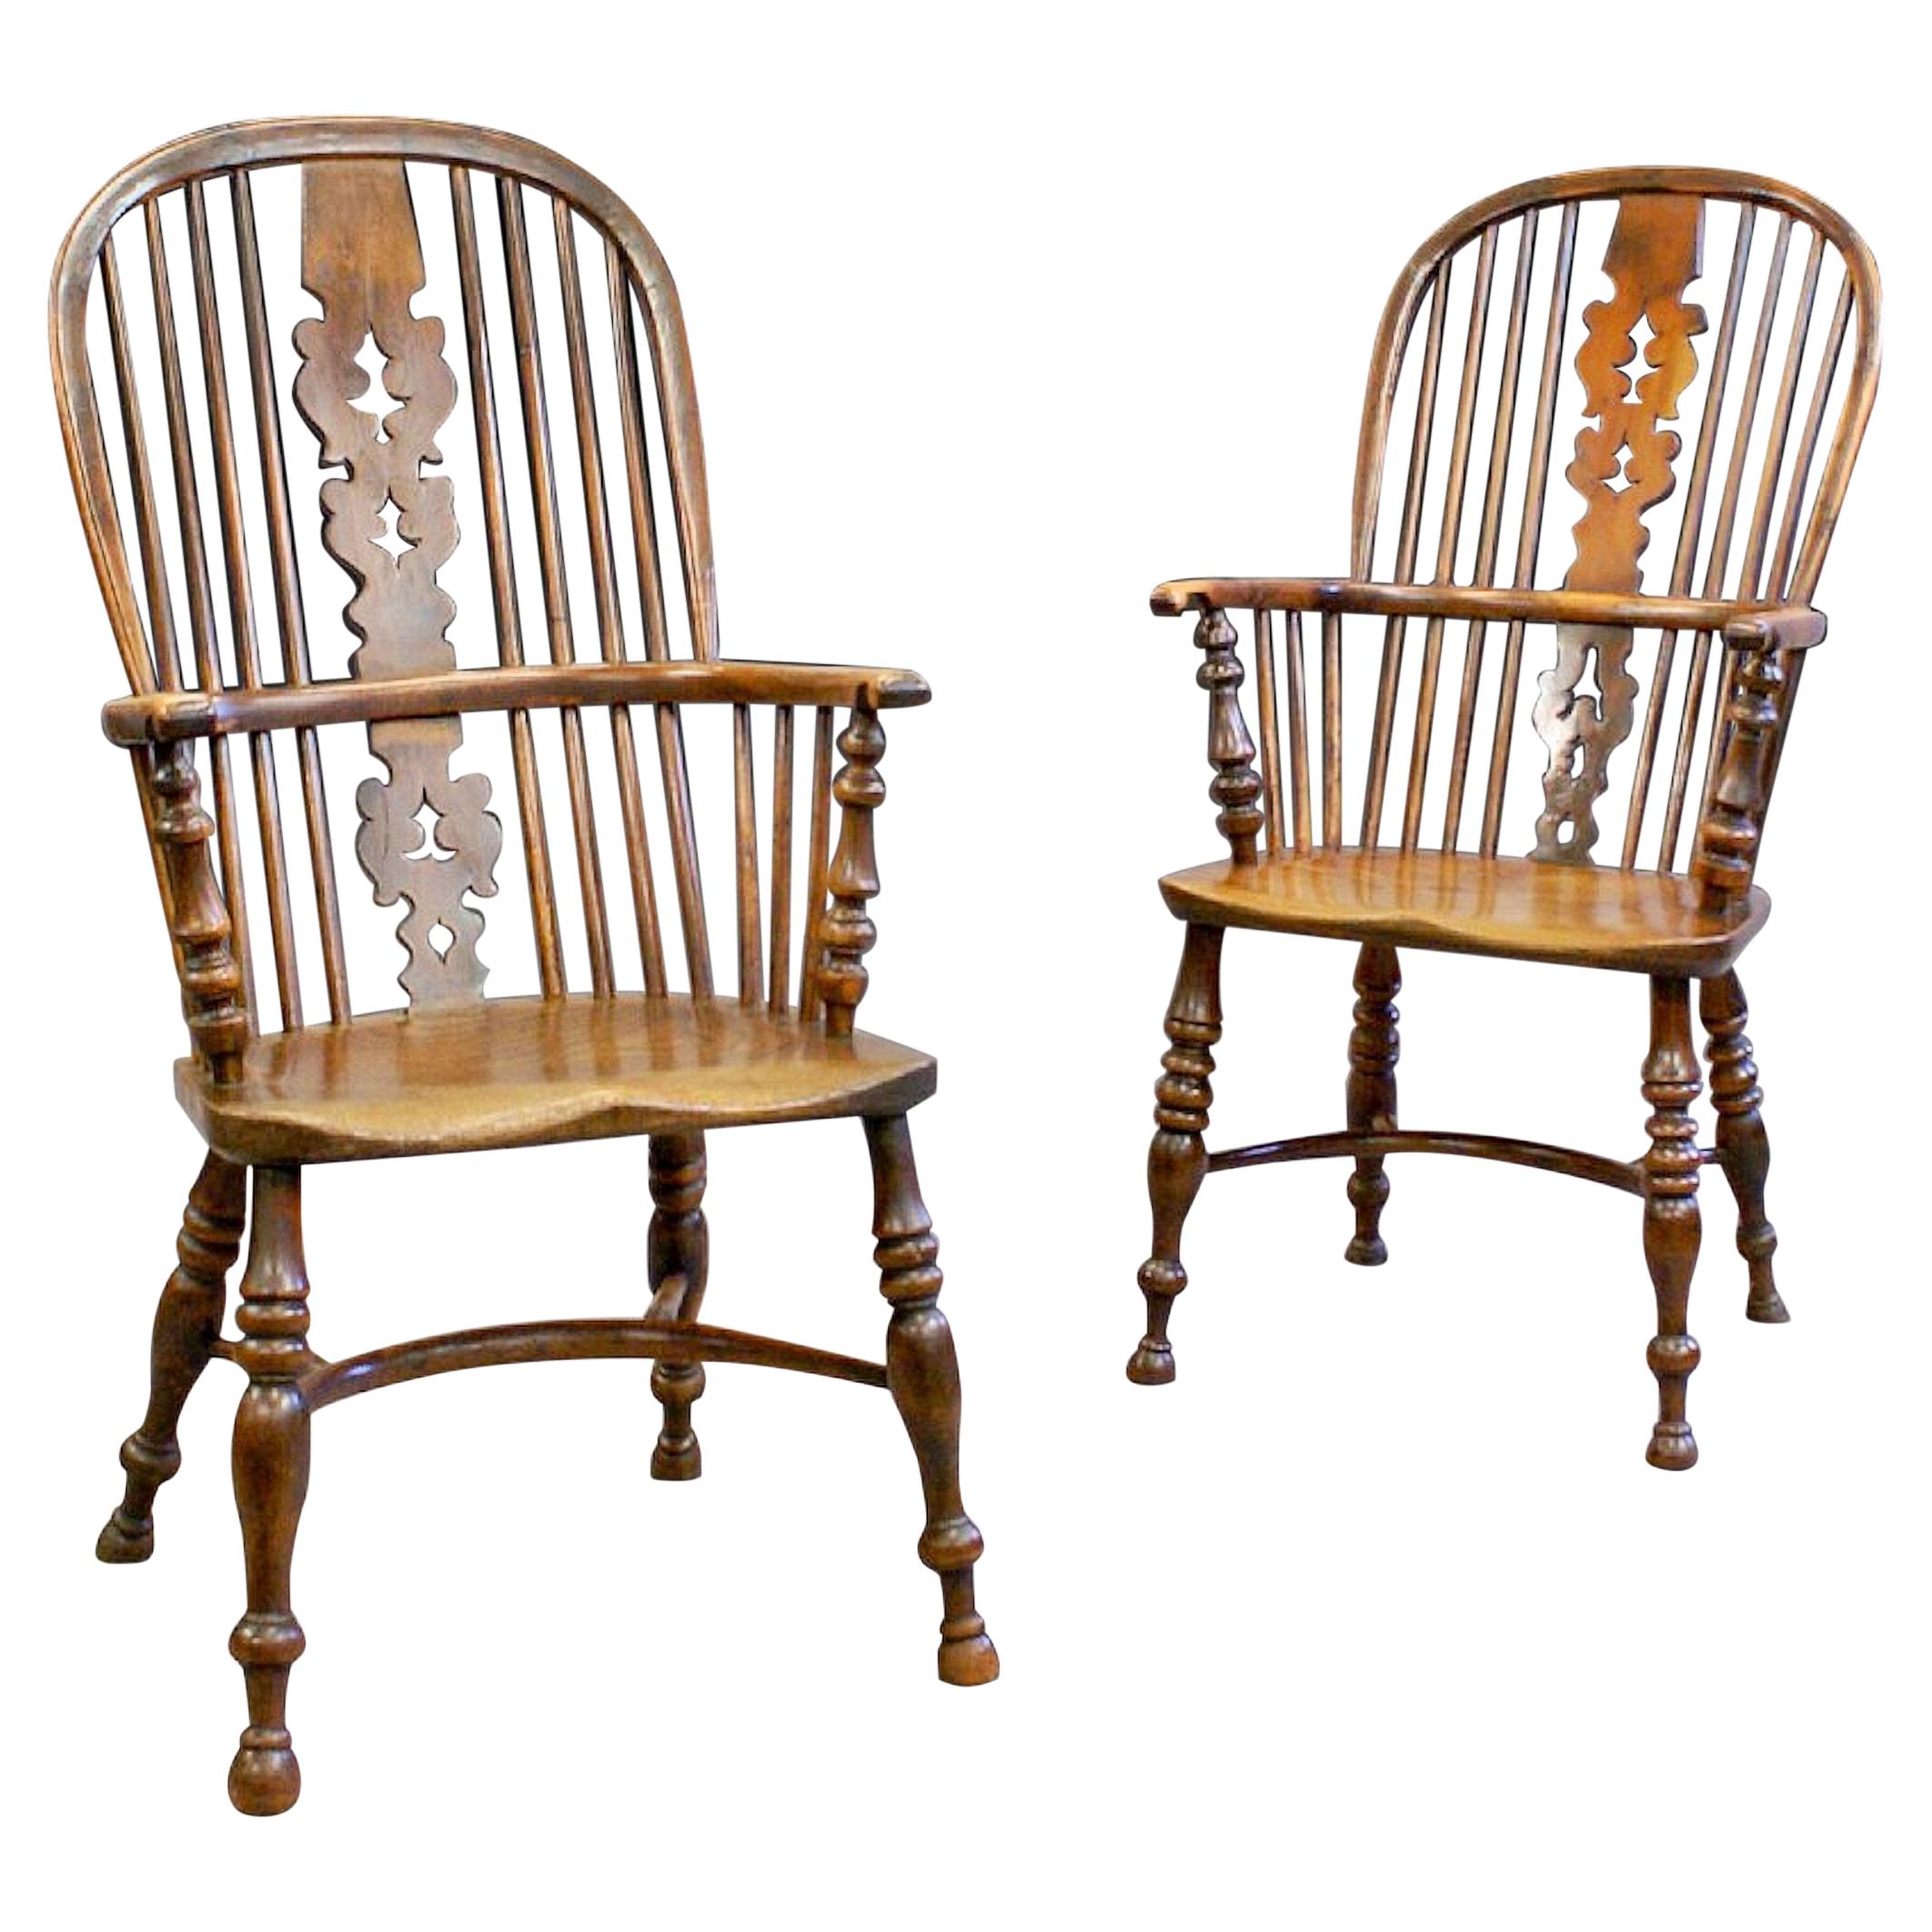 Matched Pair of Yew Wood Arm Chairs For Sale